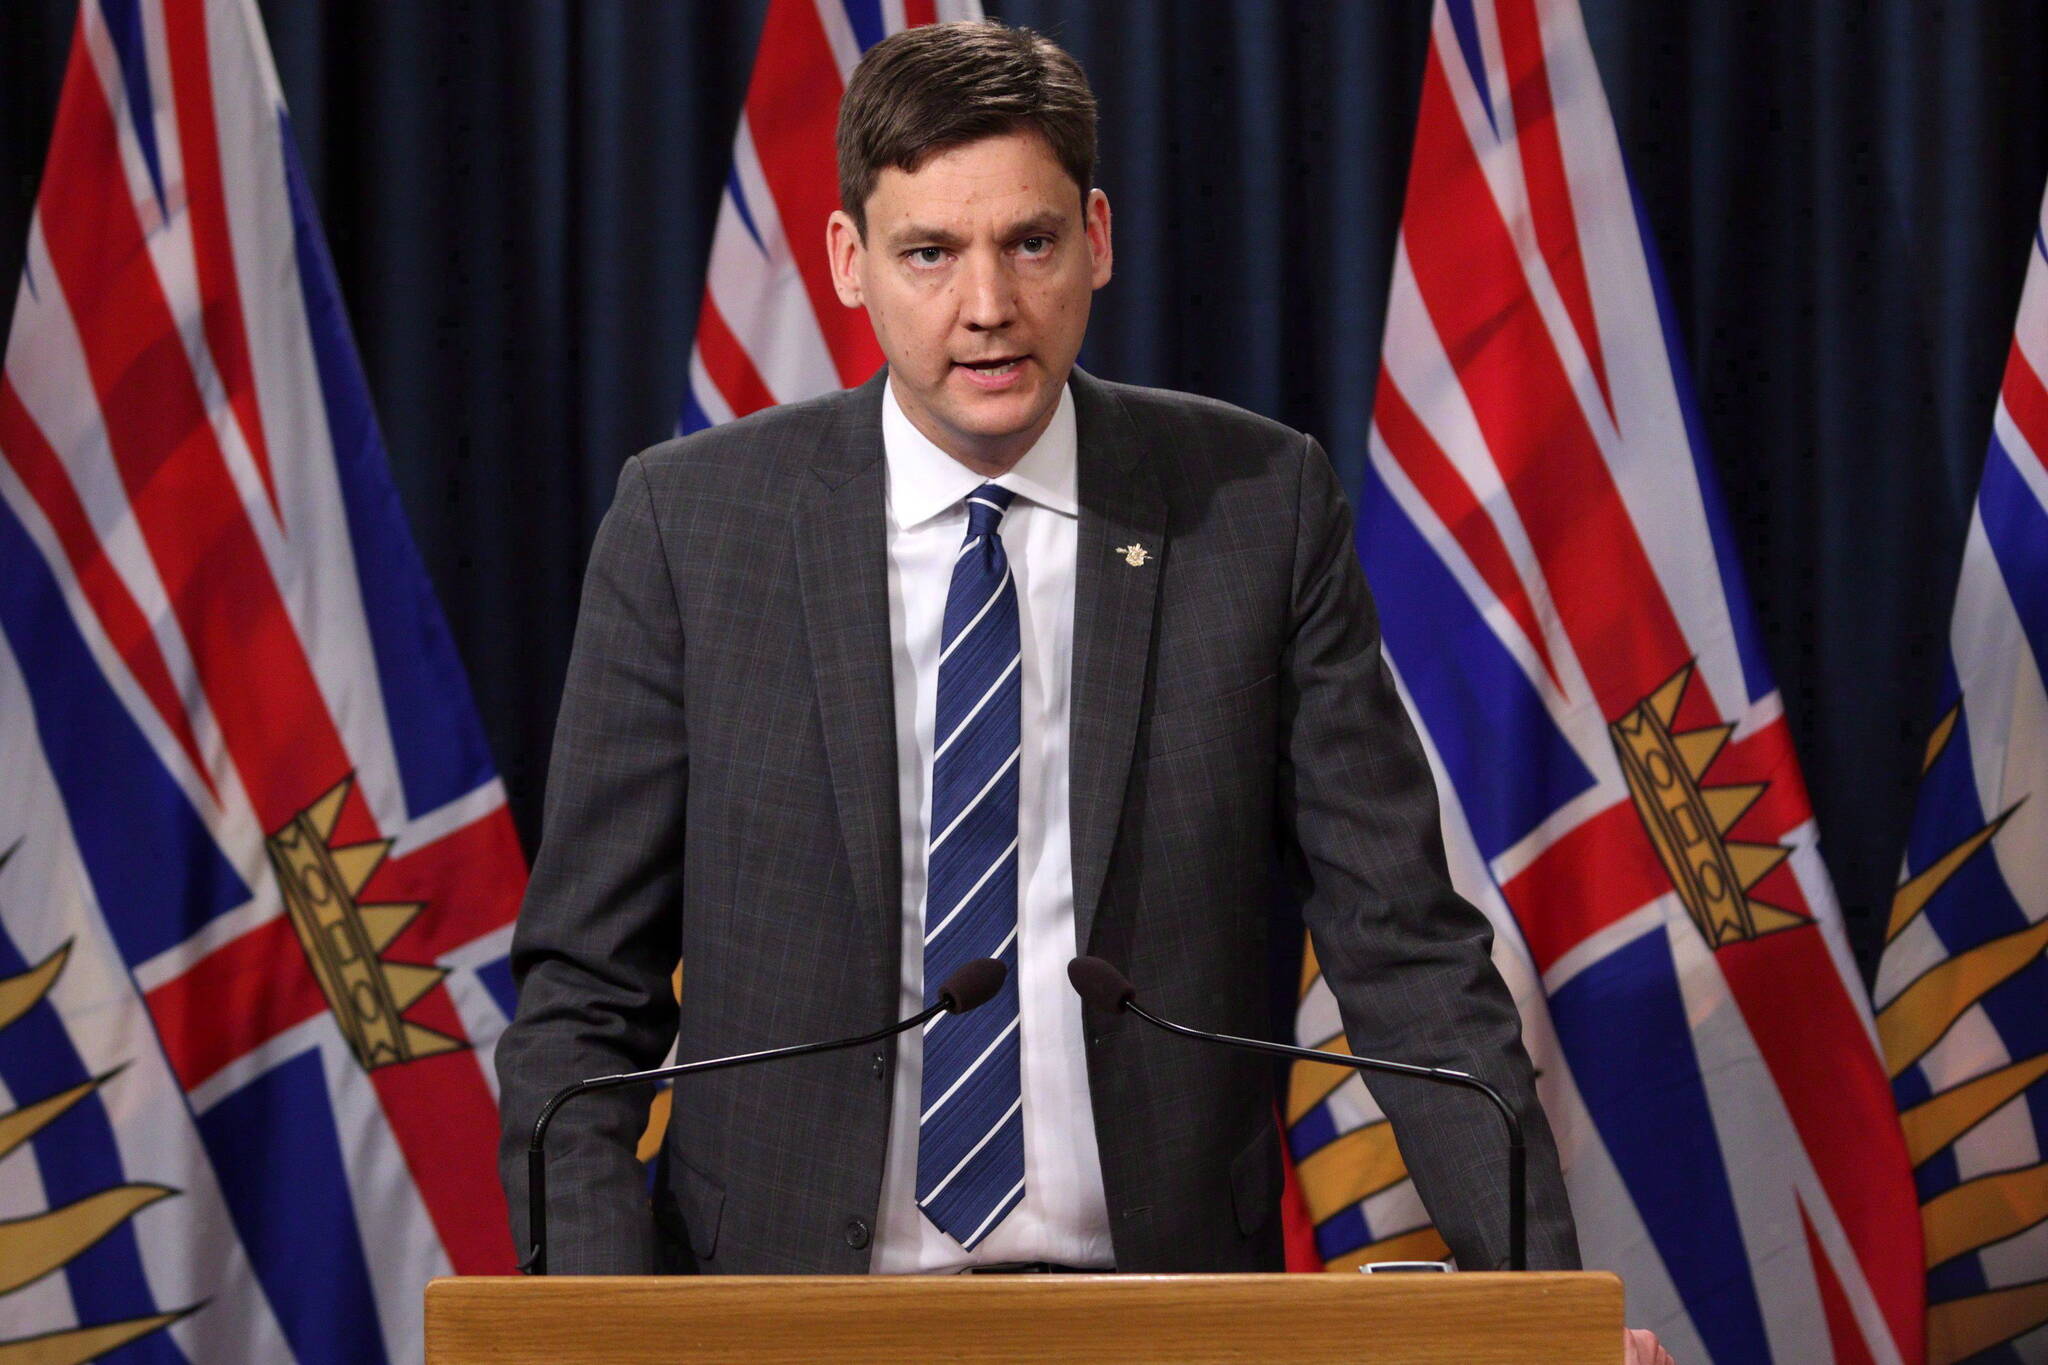 Premier David Eby says B.C. is happy to take all federal infrastructure money tied to more housing refused by other provinces, because the province has already done its homework to build more housing. (THE CANADIAN PRESS/Chad Hipolito)